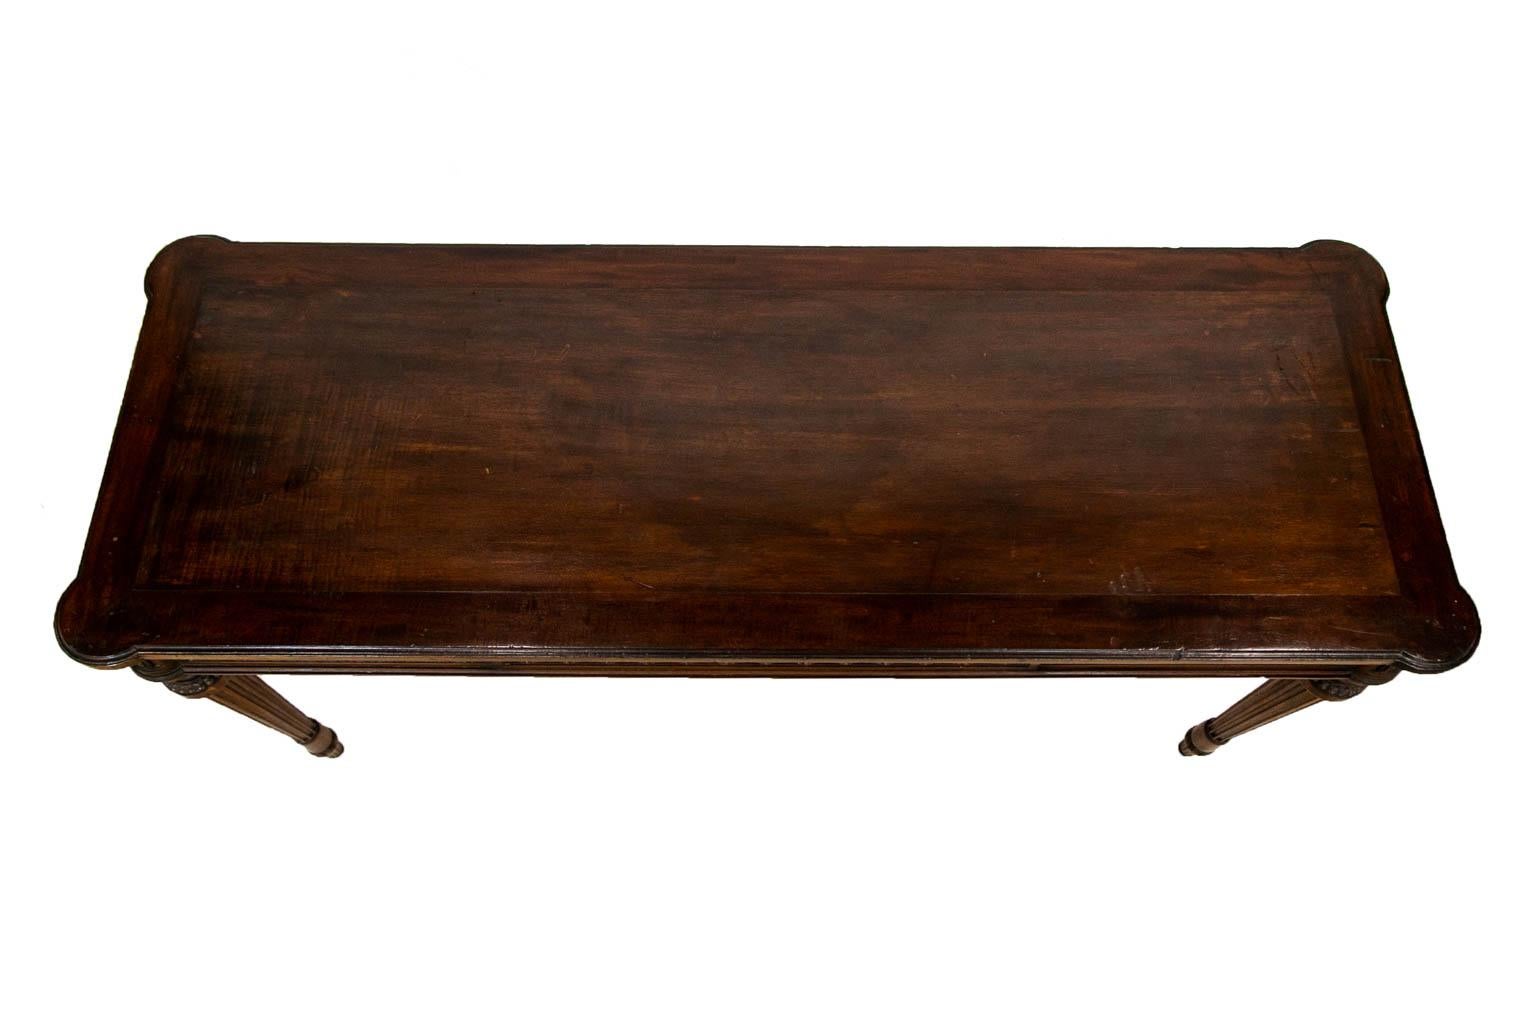 The top of this mahogany center table has a three inch border framing the center panel and has shaped edging. The front and back sides have a repeating interlaced vine and rosette panel. The ends have a recessed raised panel. The four legs each have